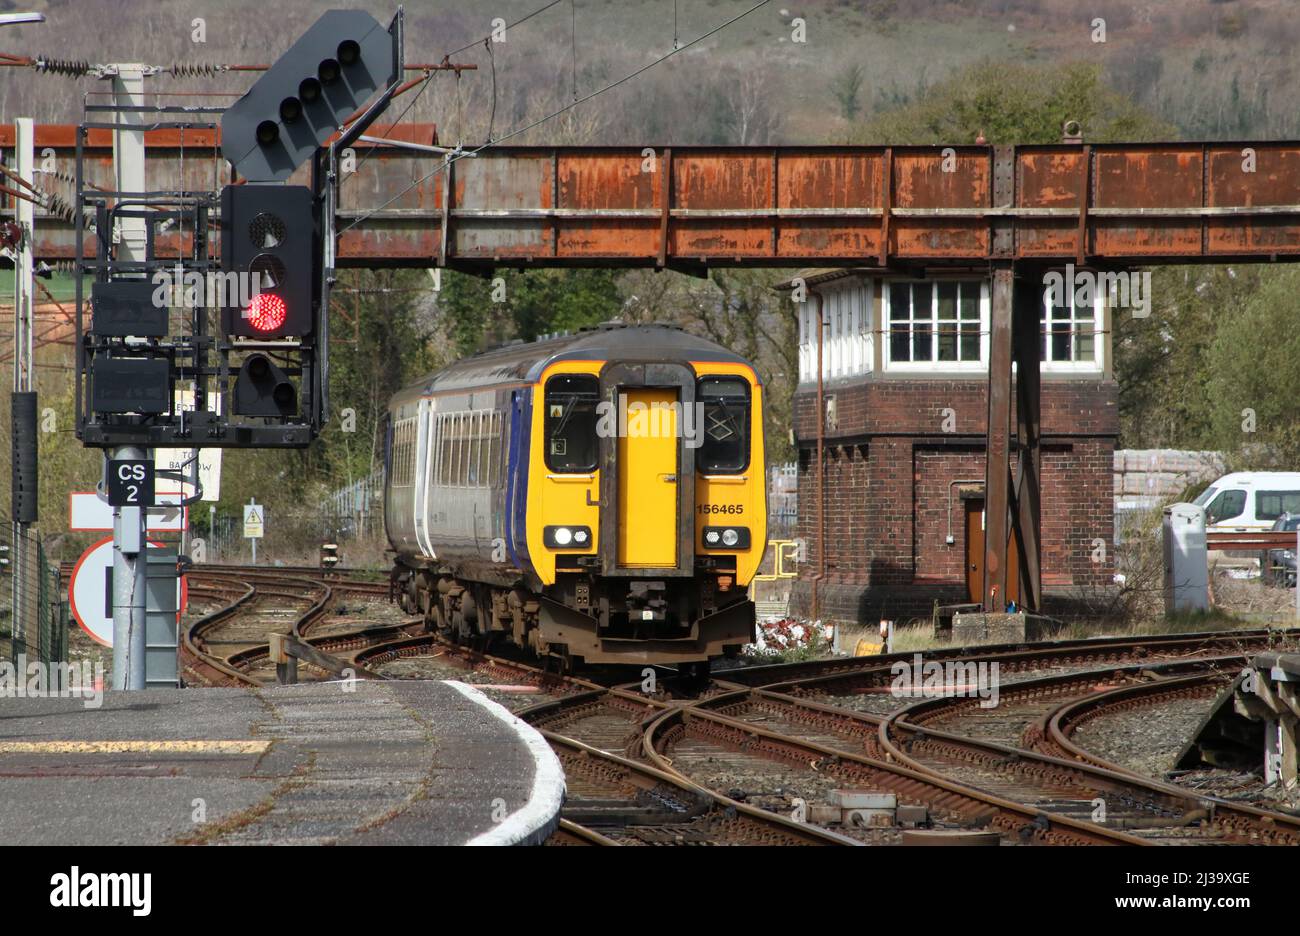 Northern Trains class 156 super sprinter dmu, unit number 156465, passing signal box and approaching Carnforth station on Wednesday 6th April 2022. Stock Photo